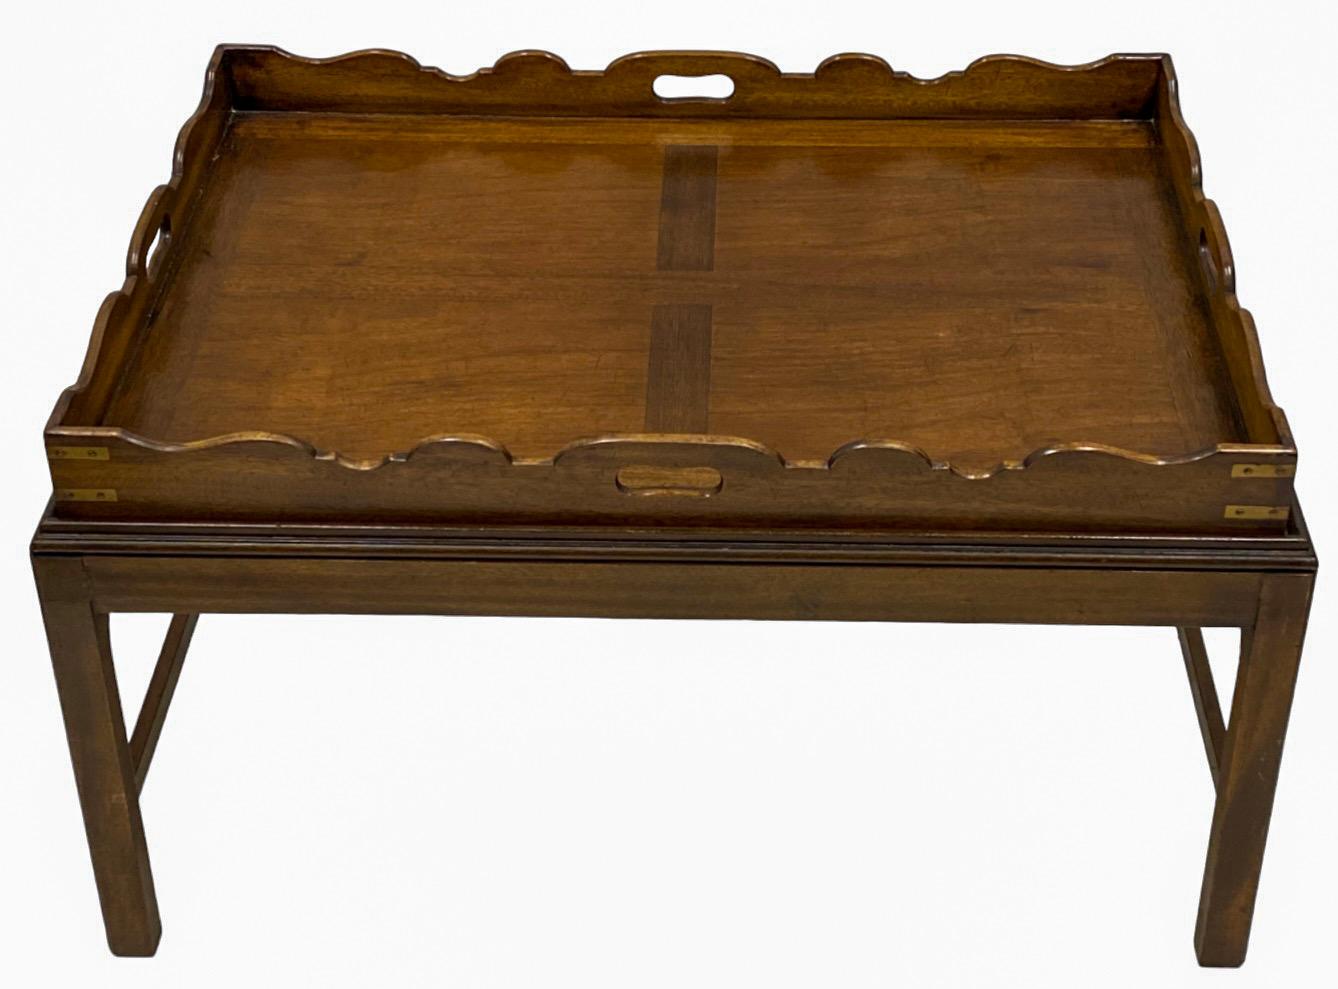 1950s English Campaign Style Brass & Banded Mahogany Butler’s Tray Coffee Table  In Good Condition For Sale In Kennesaw, GA